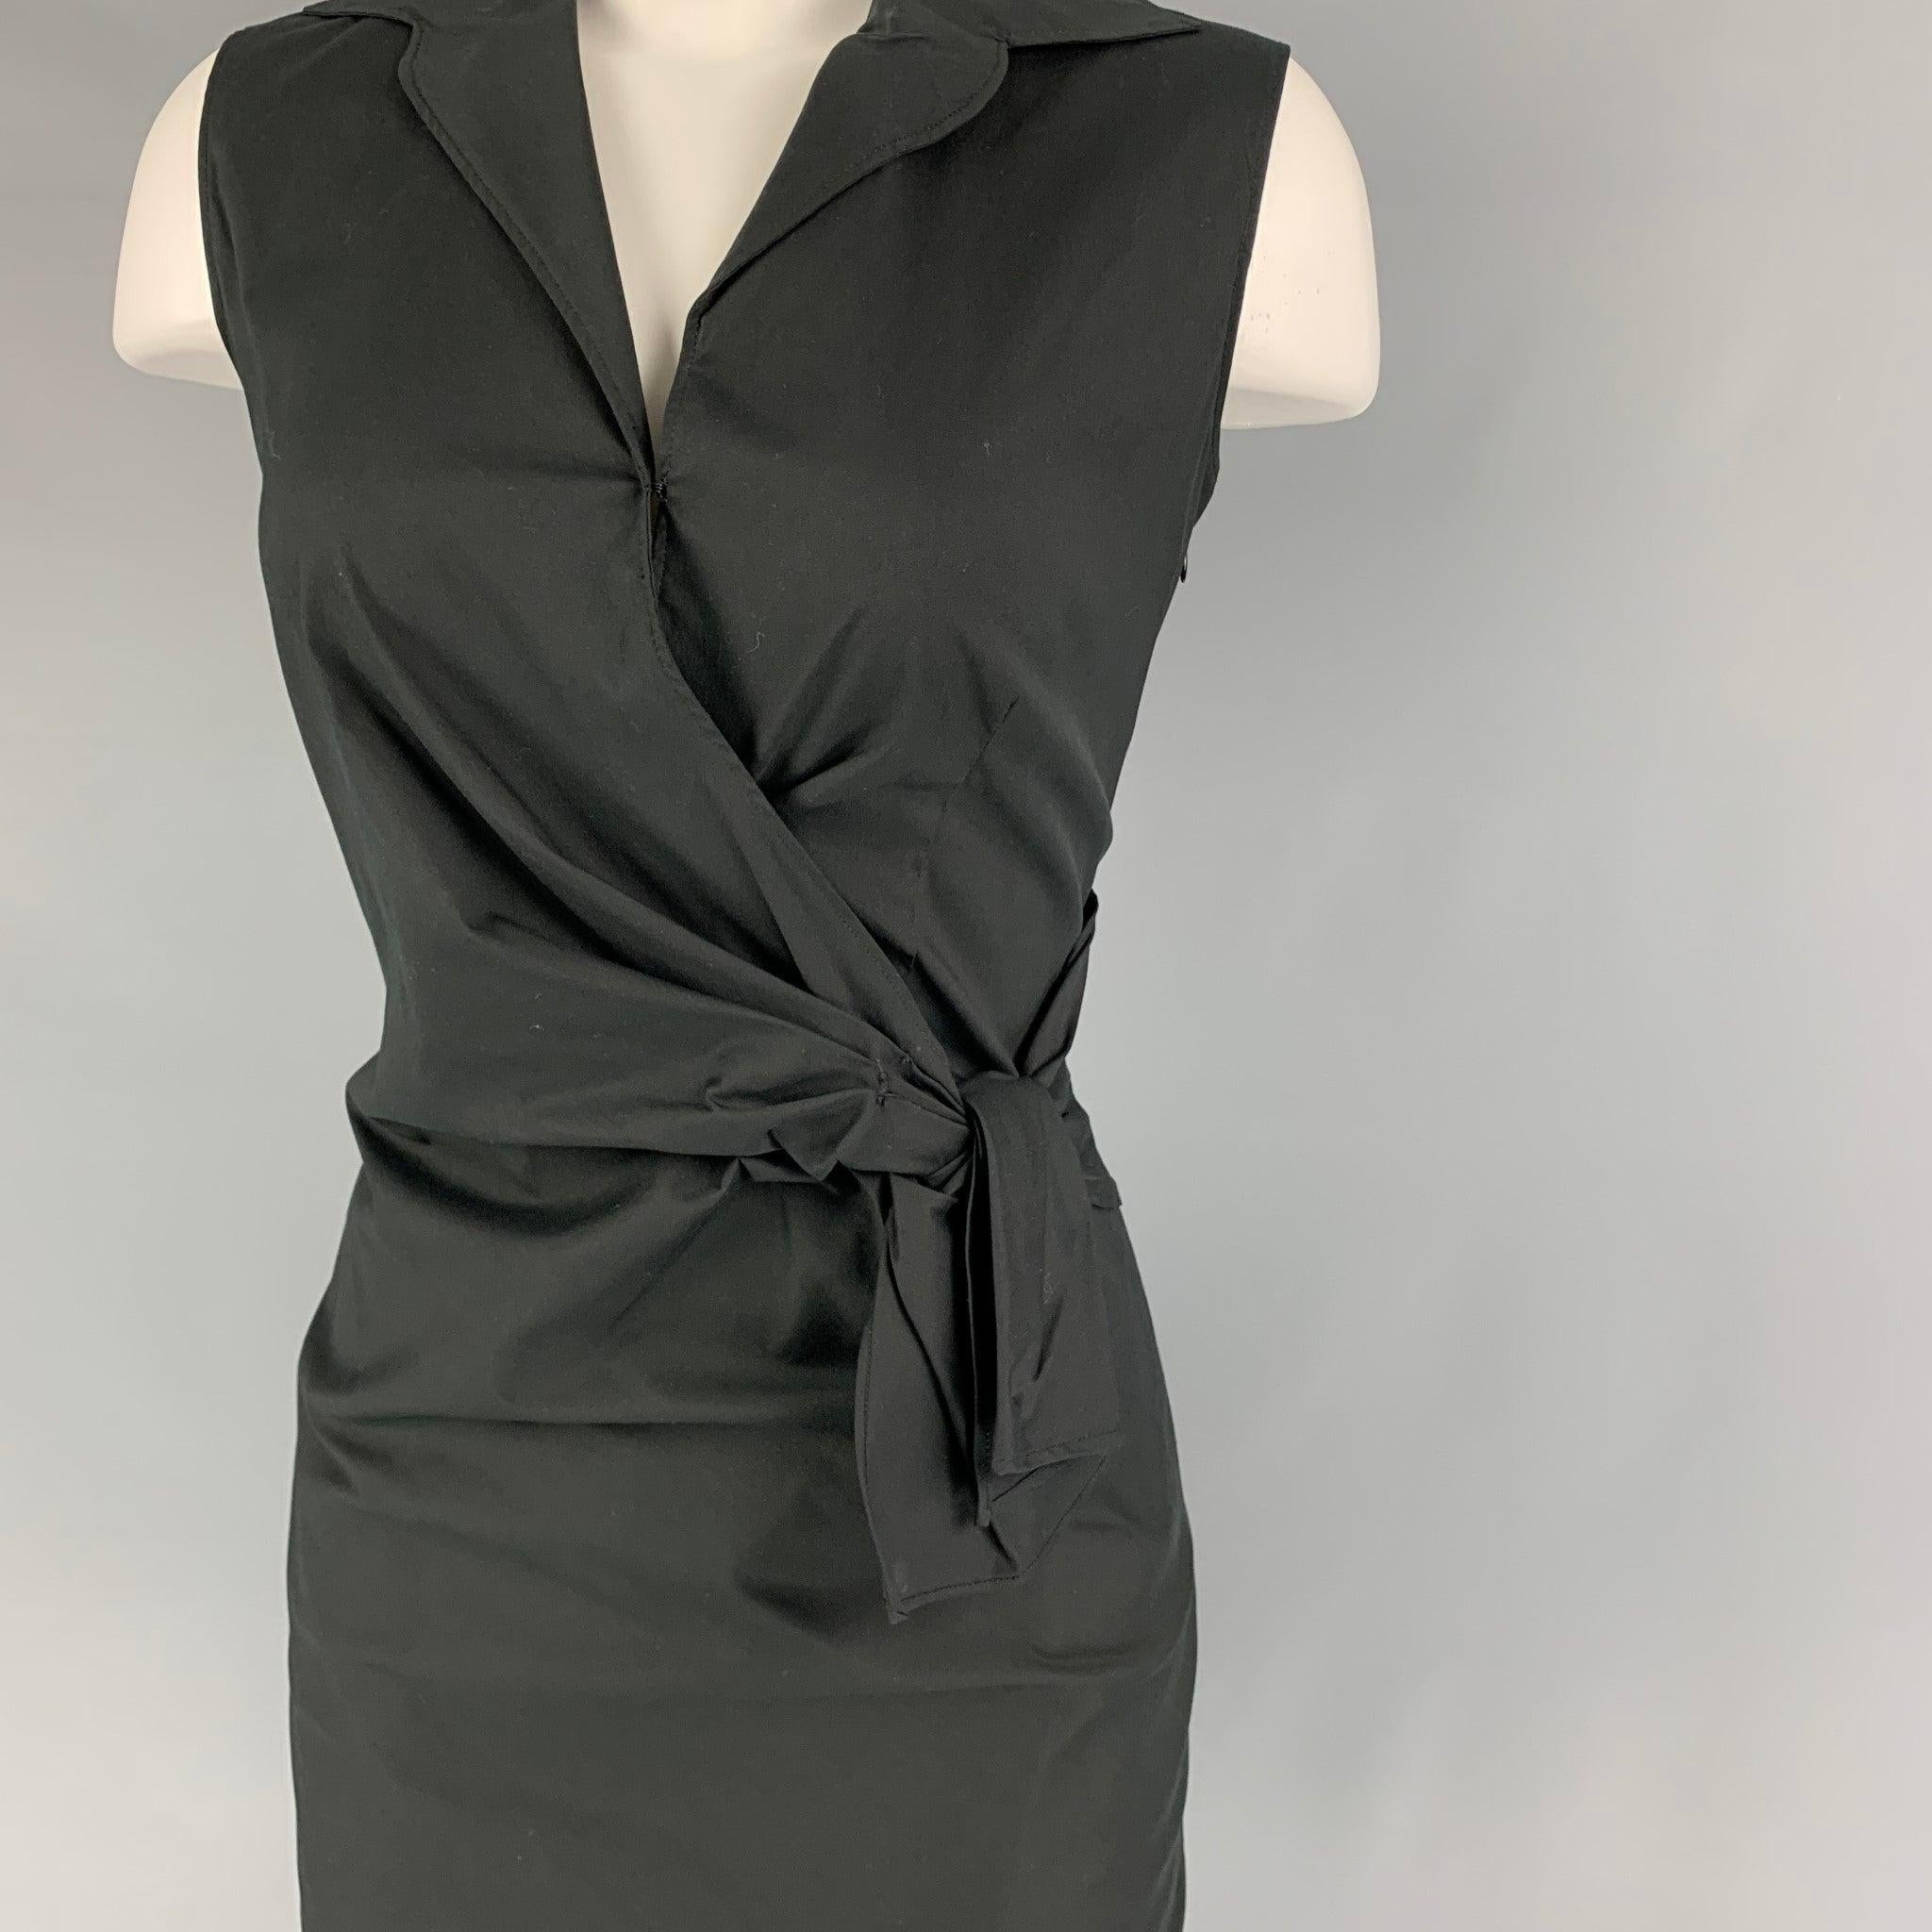 PRADA dress comes in a black cotton blend featuring a front bow design, spread collar, hook & loop detail, sleeve;ess, and a side zipper closure. Made in Italy.
 New with tags.
  
 

 Marked:  38 
 

 Measurements: 
  
 Shoulder: 14 inches Bust: 29